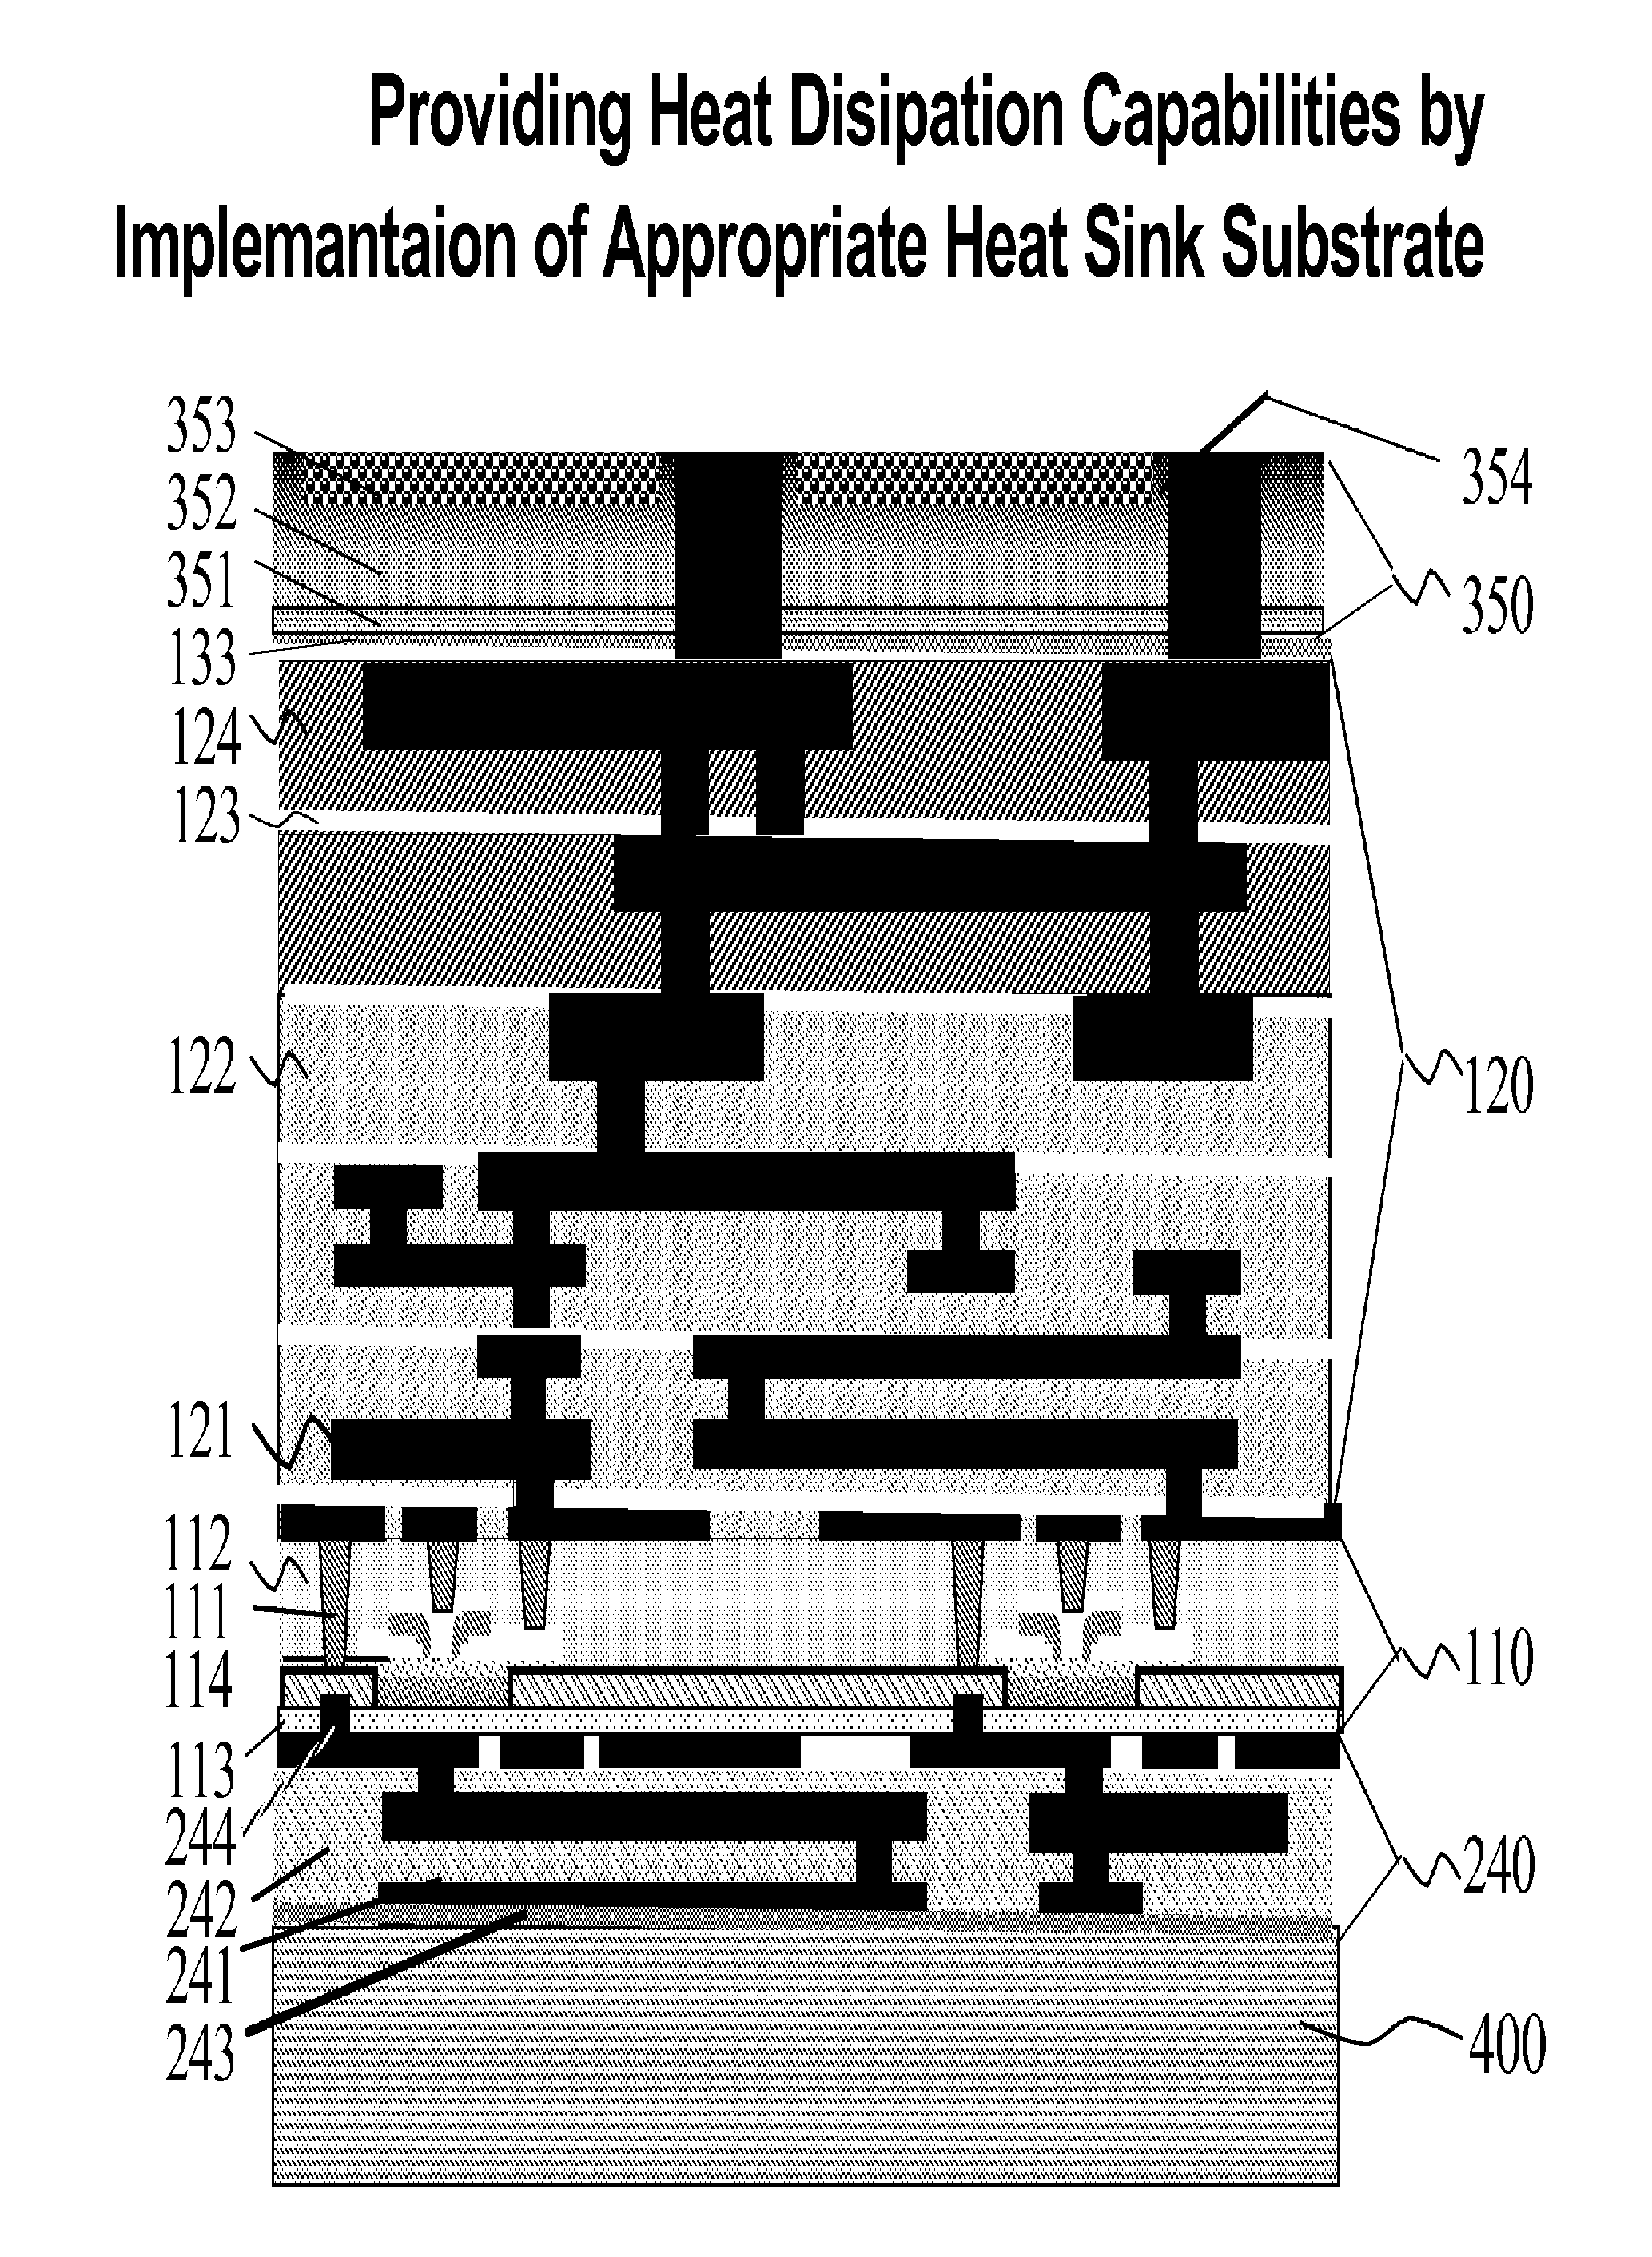 Layer transfer process and functionally enhanced integrated circuits produced thereby